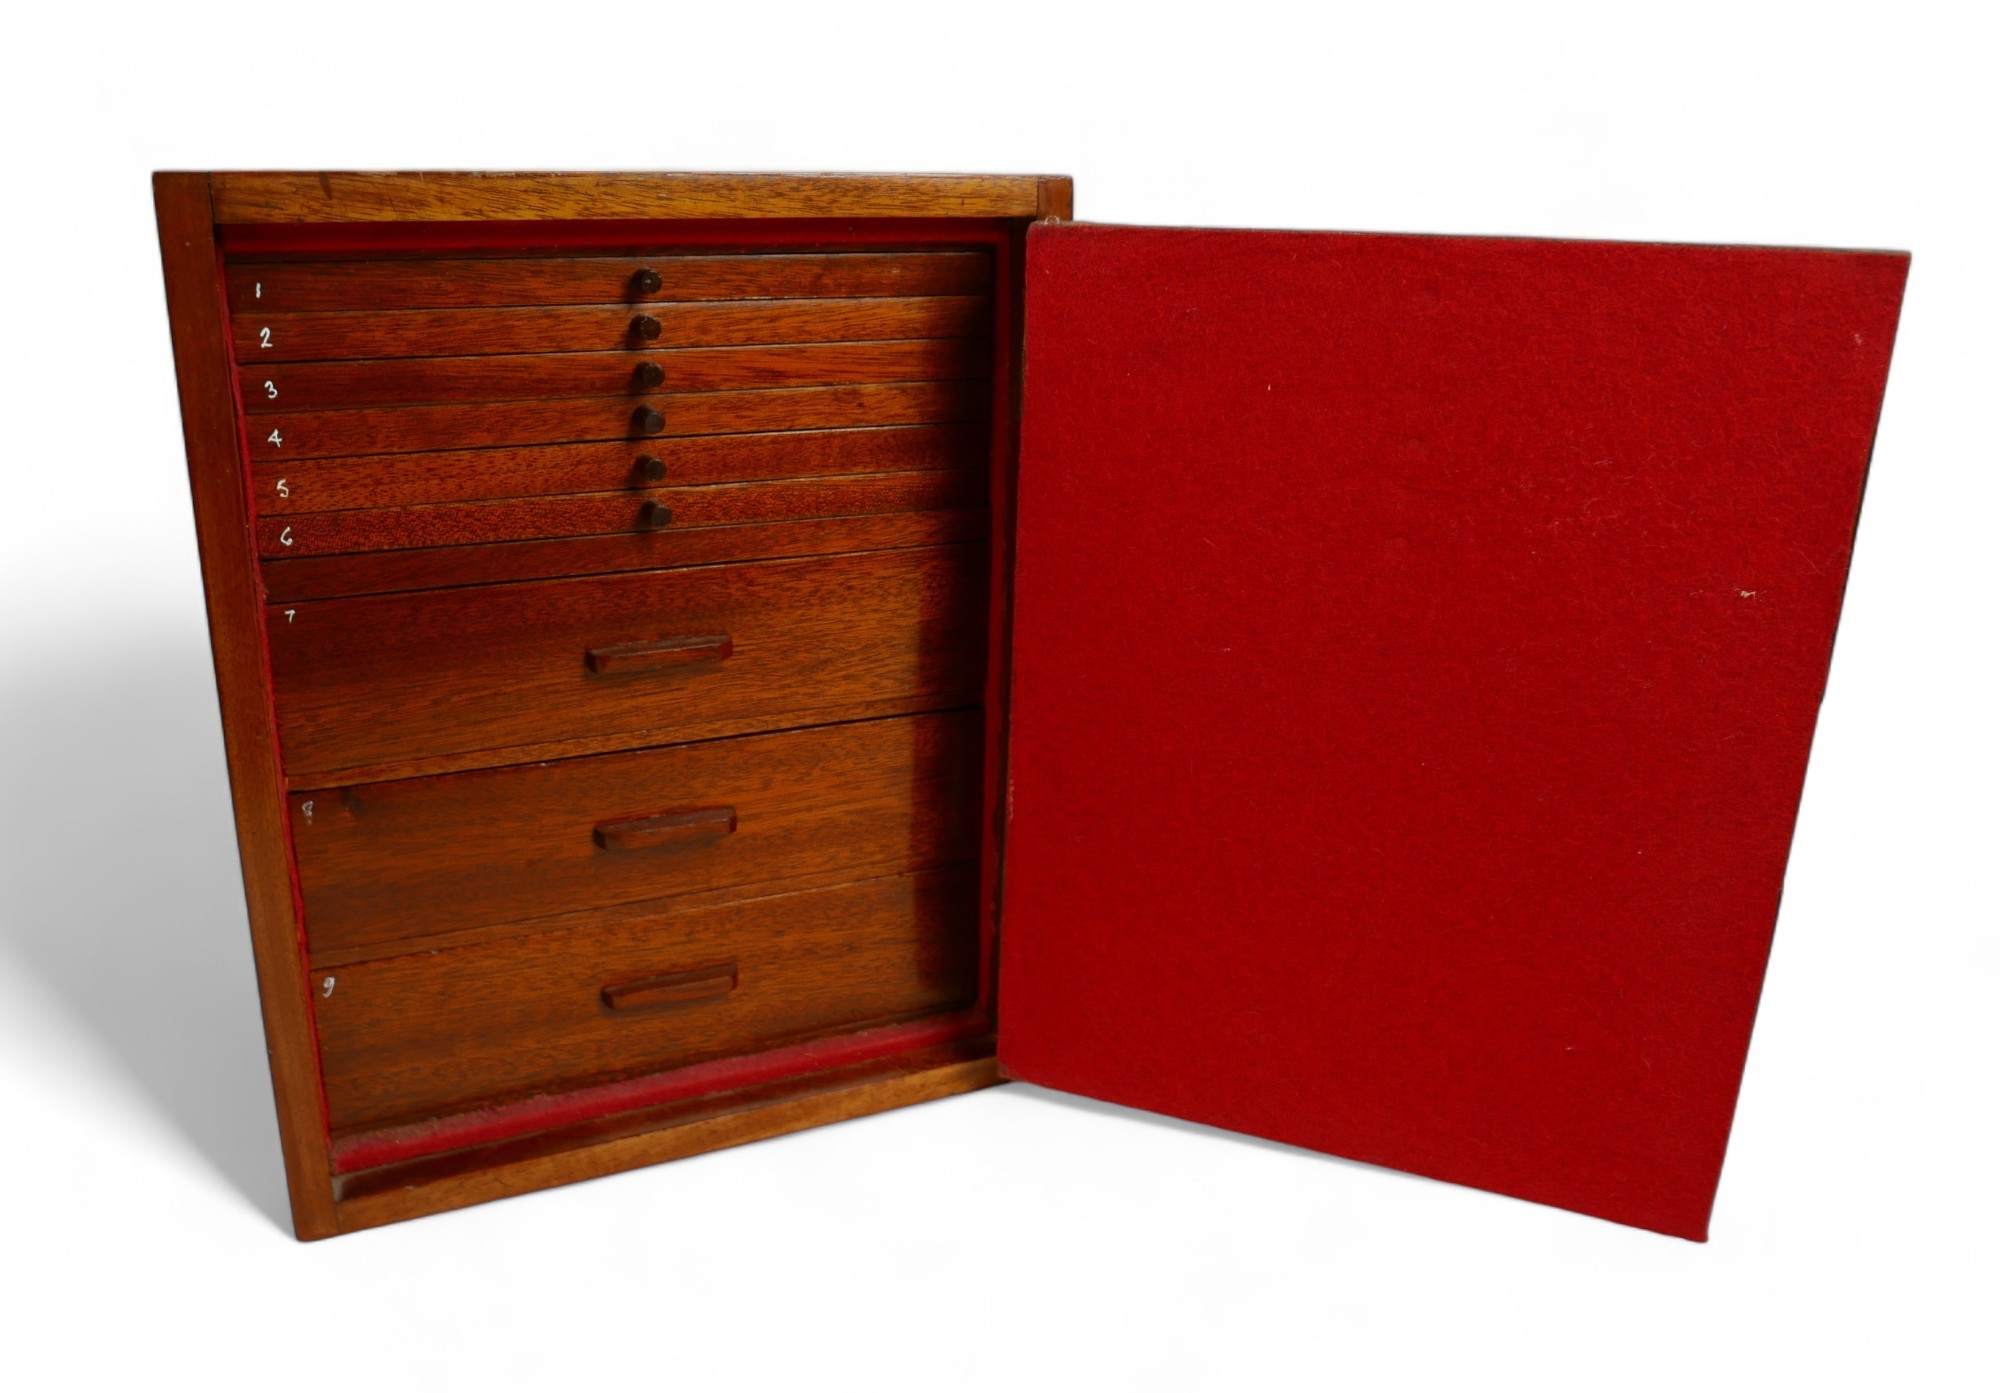 A collection of mainly English coins and other items contained in a nine drawer mahogany